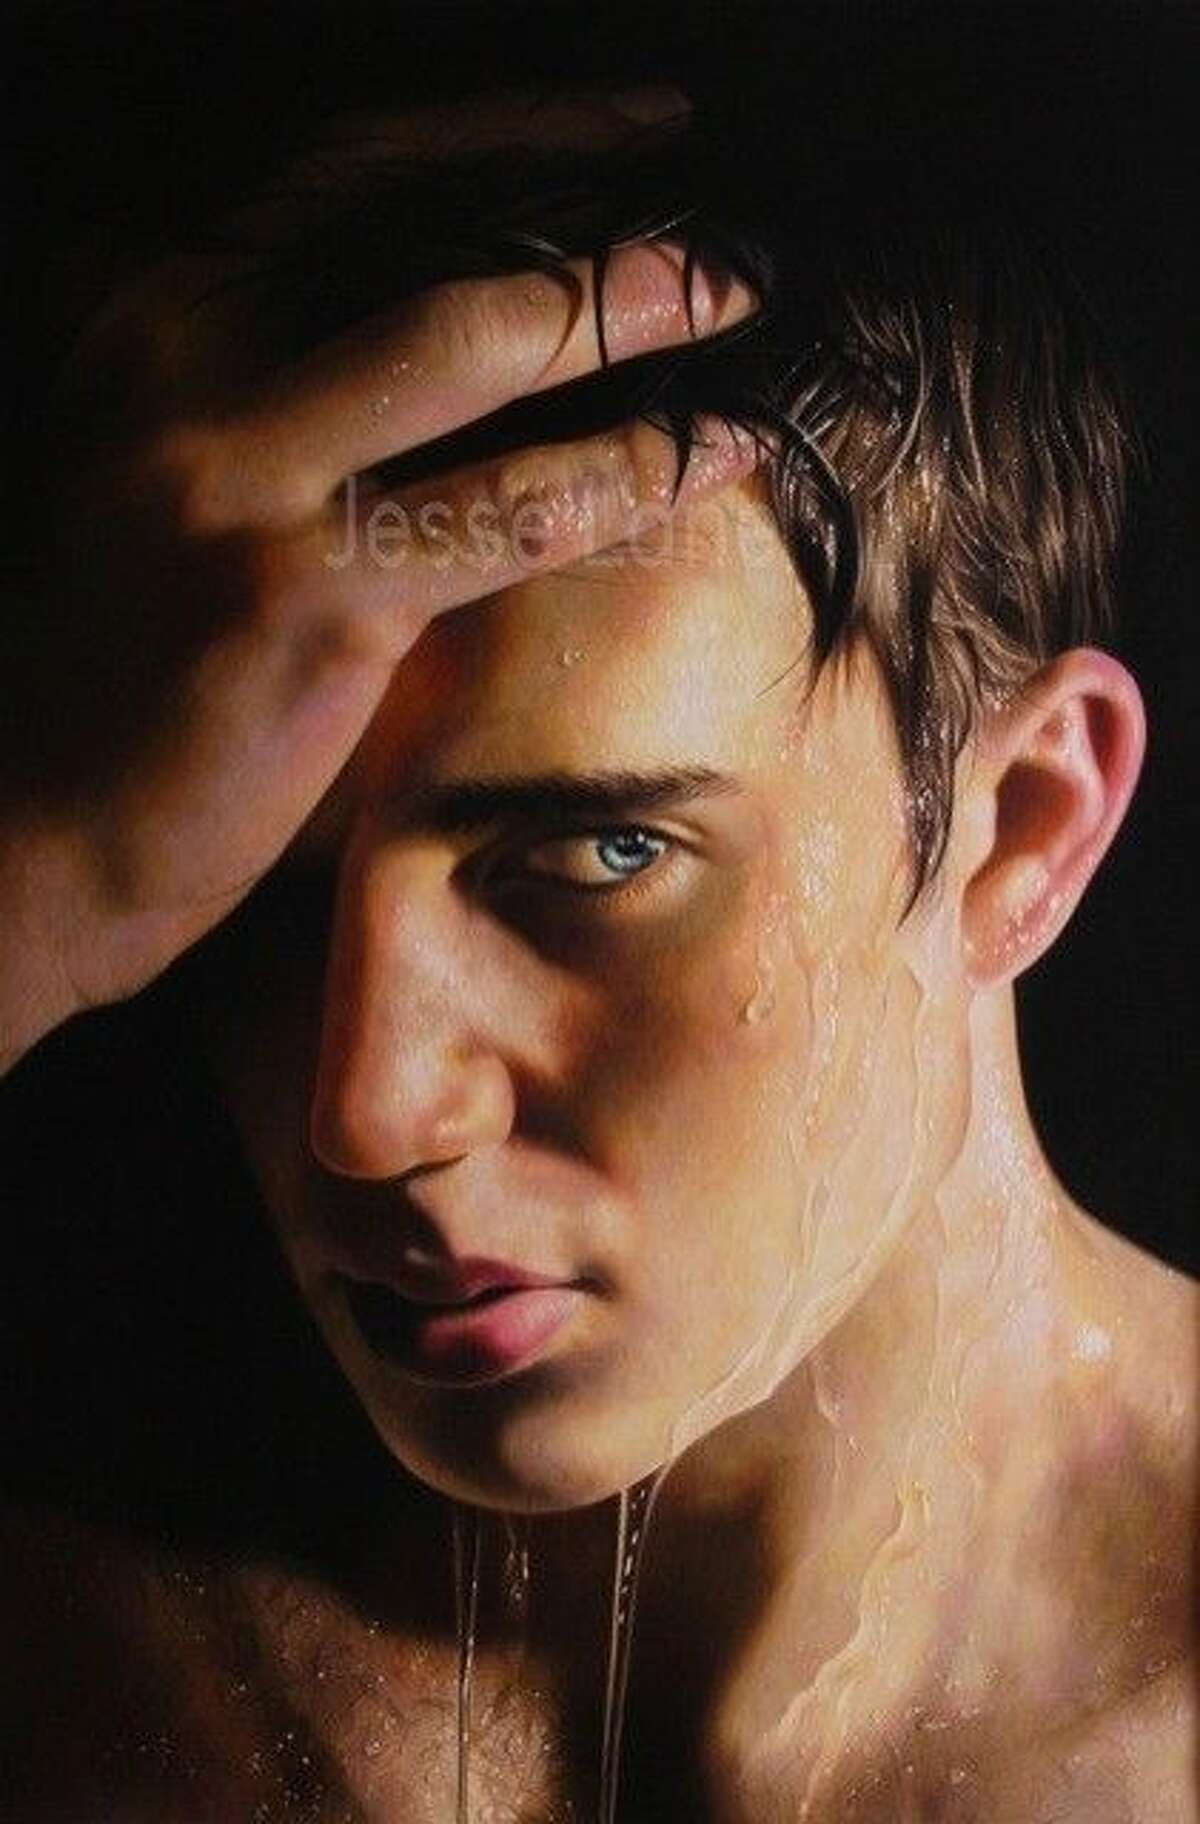 The pictured art was the top winner at the Sept. 26 Conroe Art League competition. The colored pencil painting by Jesse Lane, titled, “Resolve,” won Best of Show.